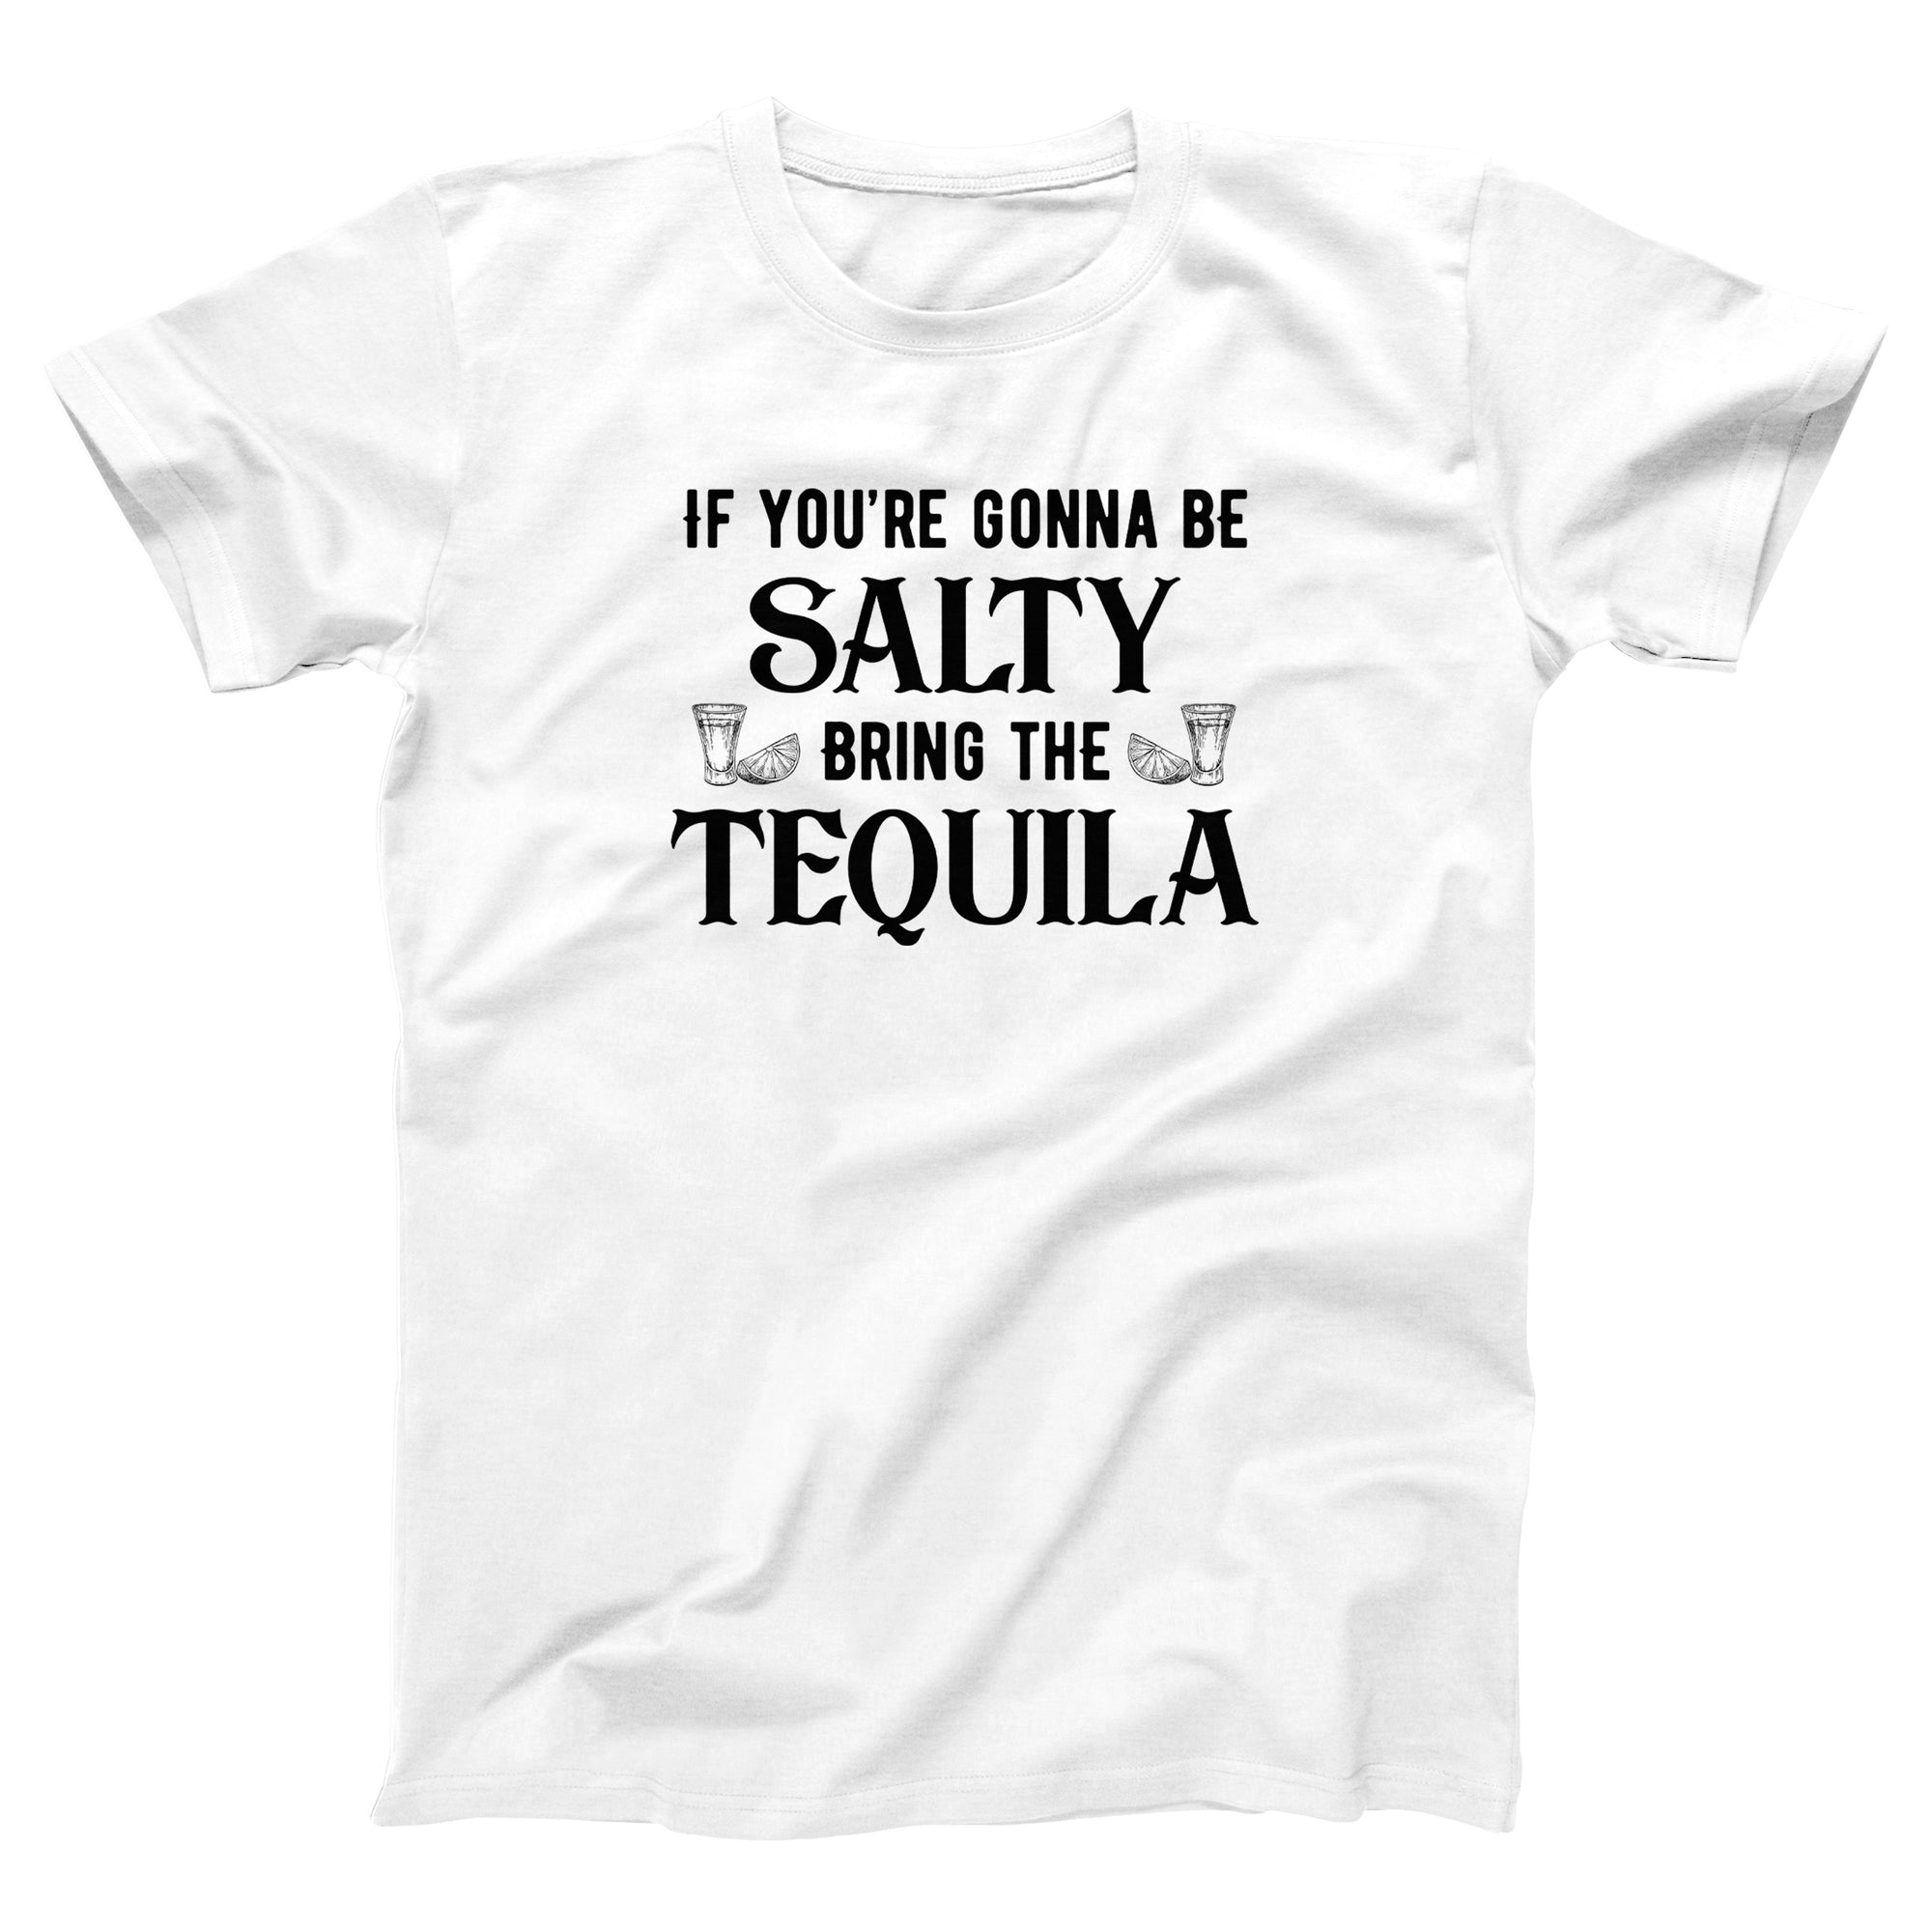 If You're Gonna Be Salty Adult Unisex T-Shirt - anishphilip